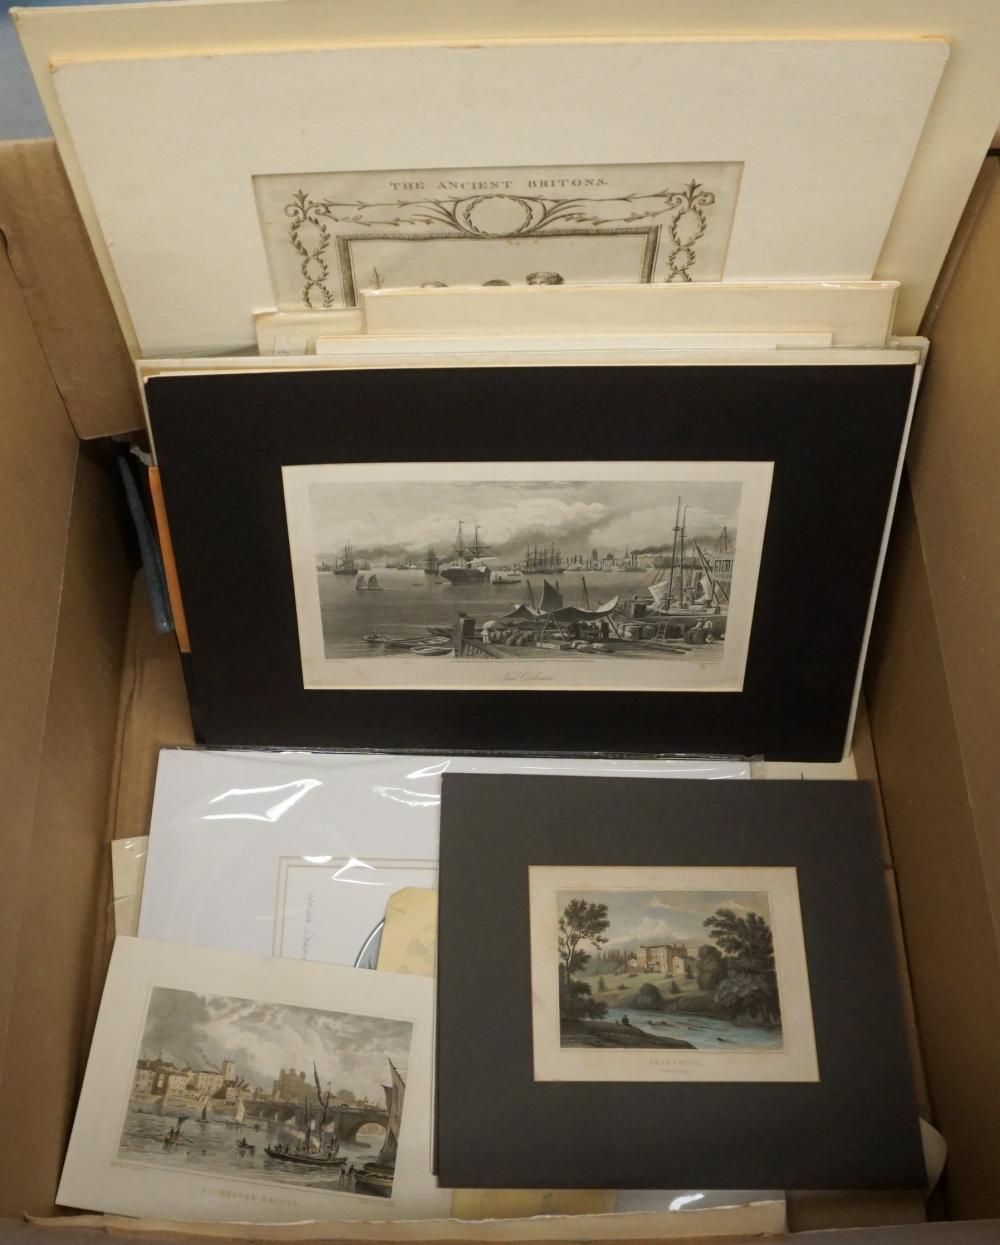 COLLECTION OF ENGRAVINGS AND LITHOGRAPHSCollection